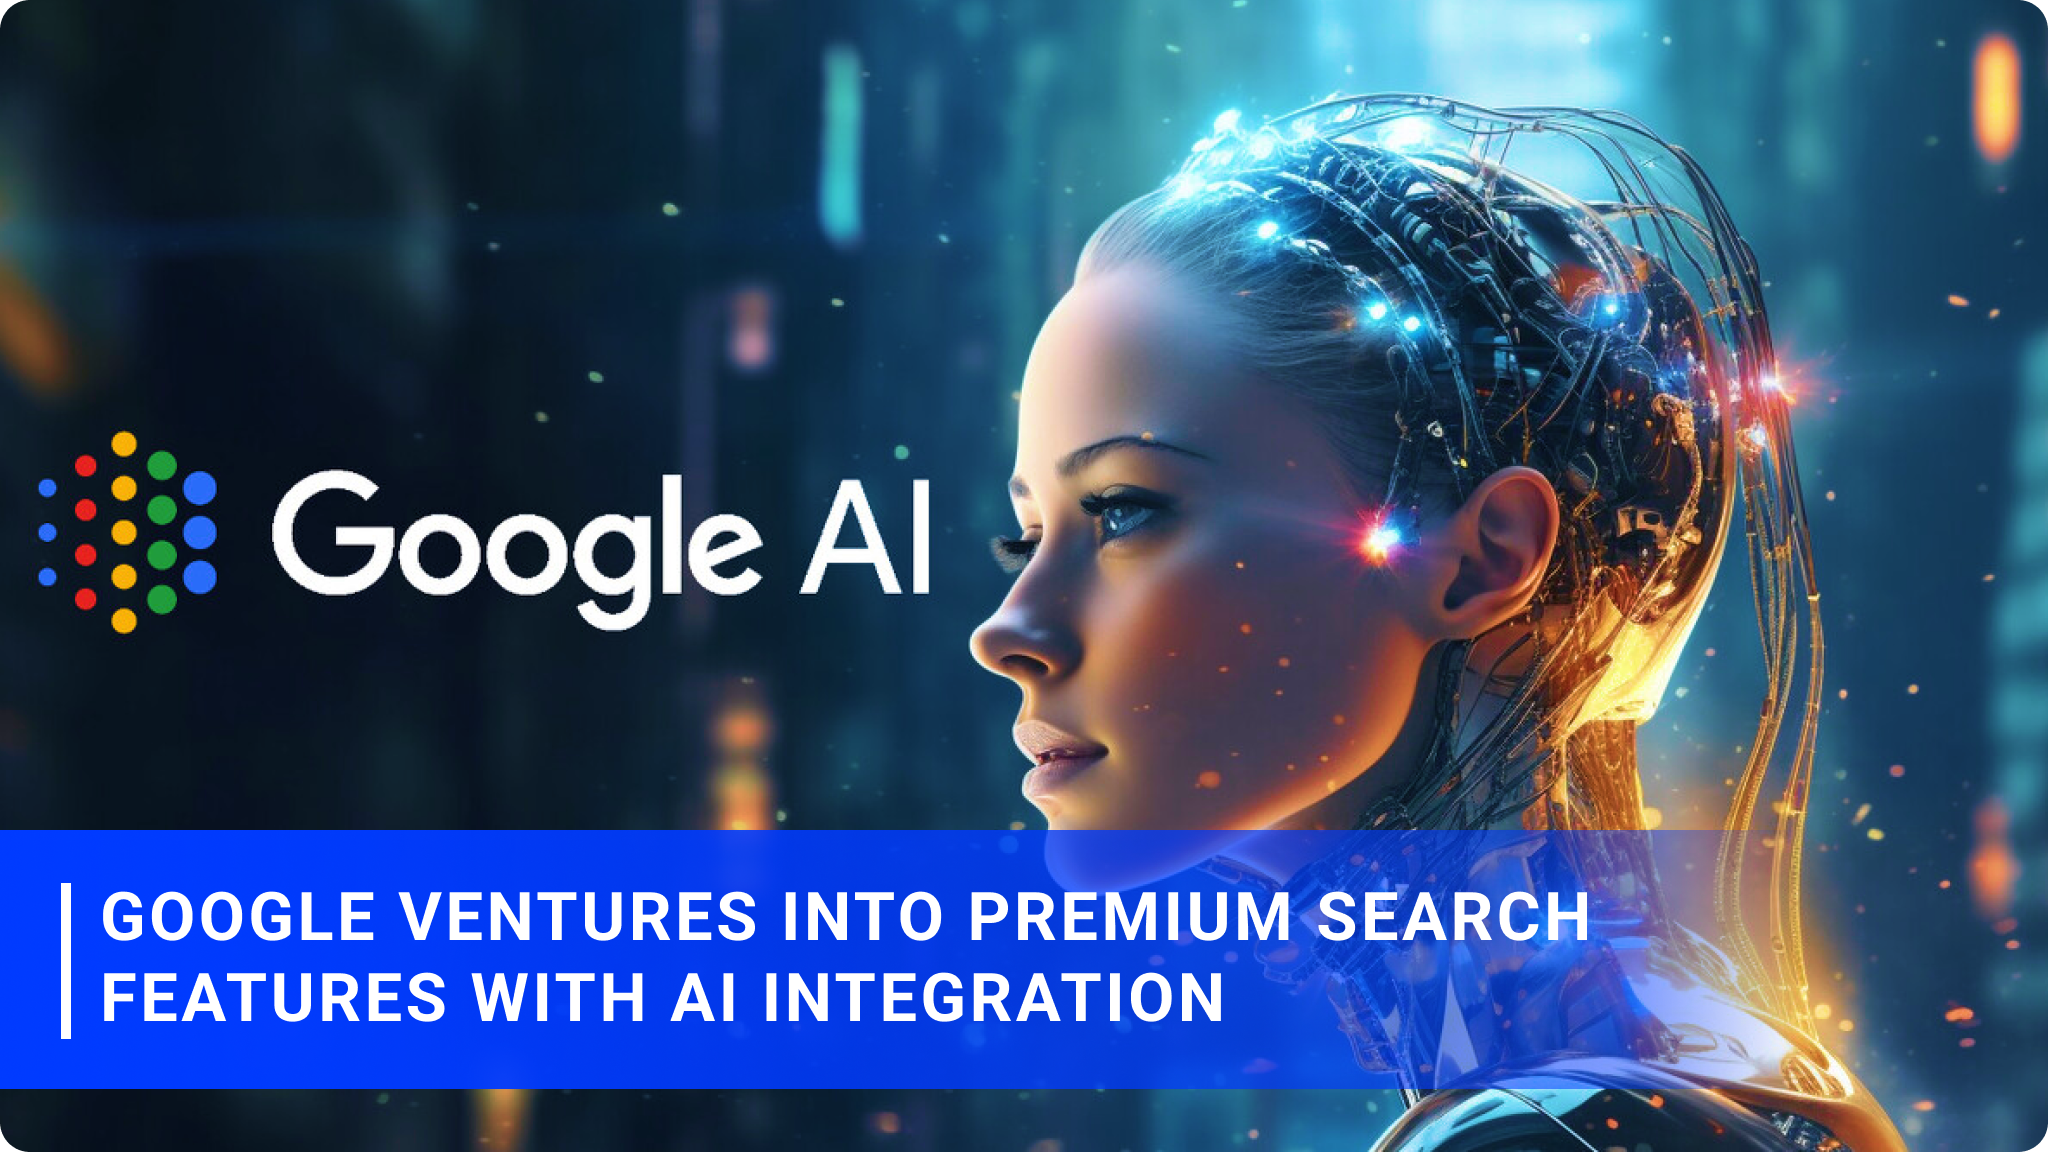 Google Ventures into Premium Search Features with AI Integration